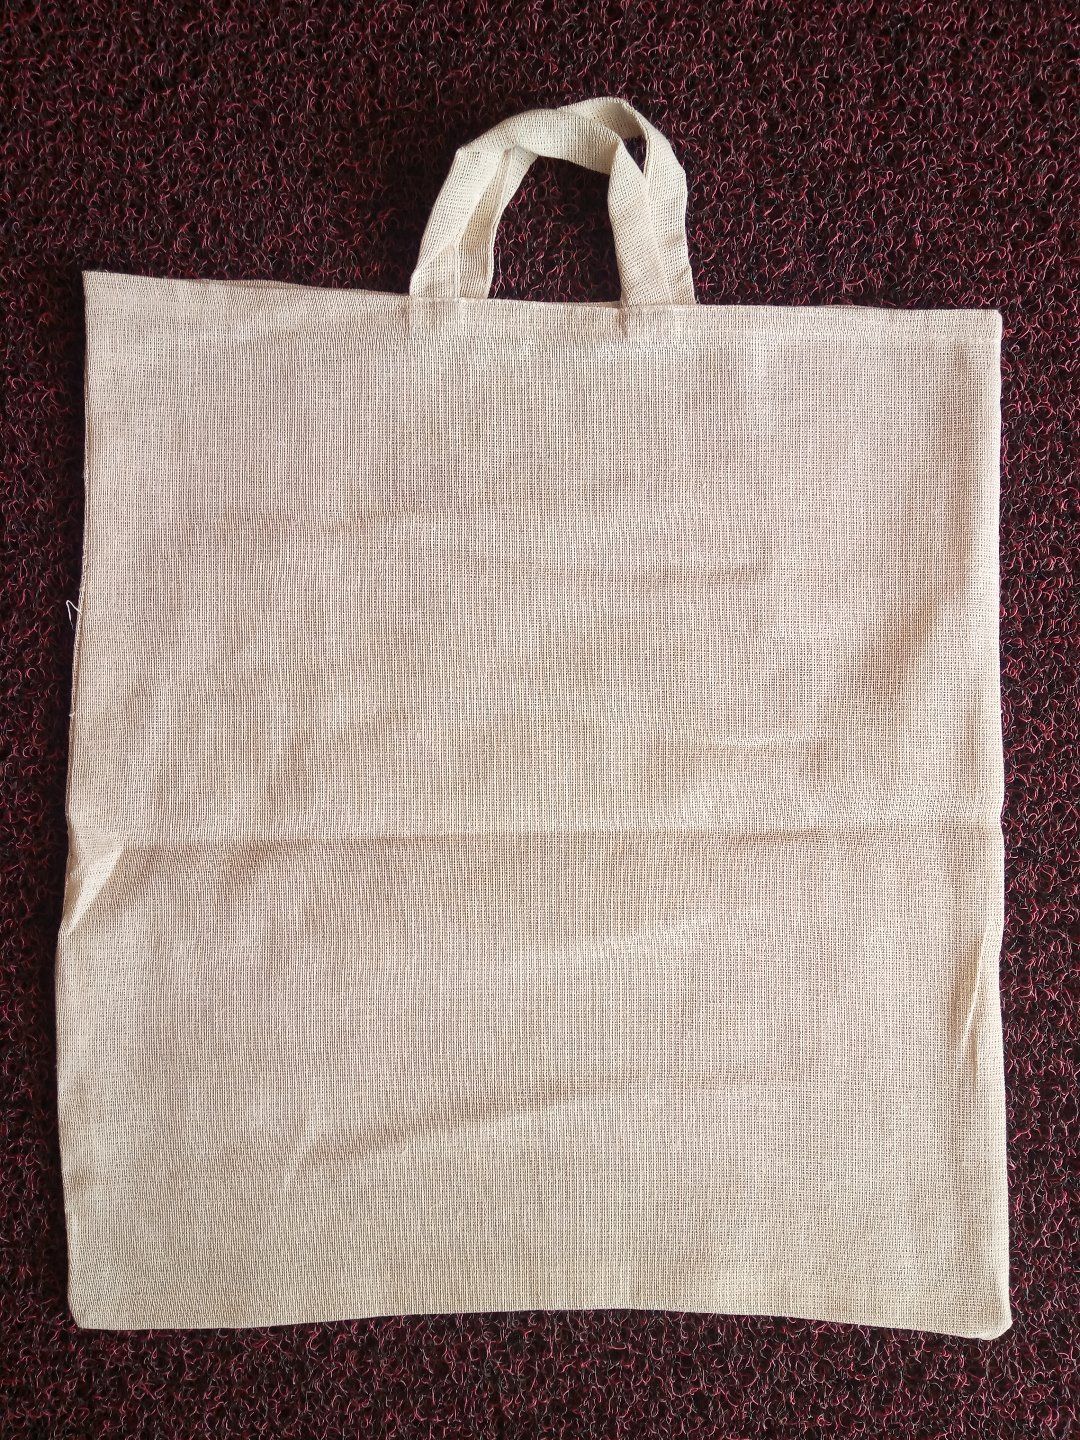 Bag Grocery cloth reusable carry bags or fruit collection market bags  AG-3106R | Agriculture Seed Marine Fish | Abronexport.com